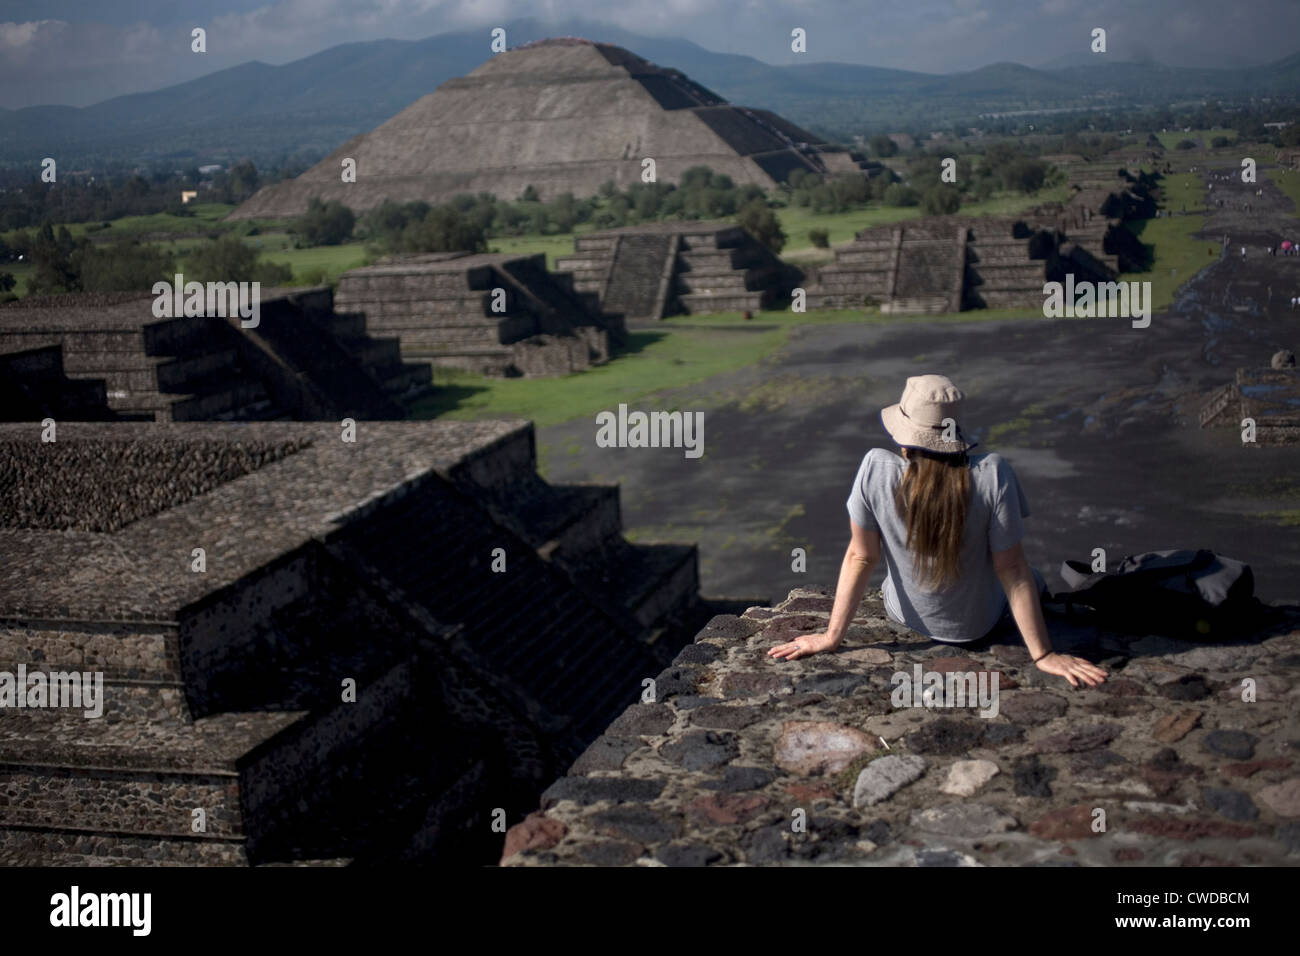 A woman looks at the Pyramid of the Sun, back left, from the Pyramid of the Moon in Teotihuacan Stock Photo